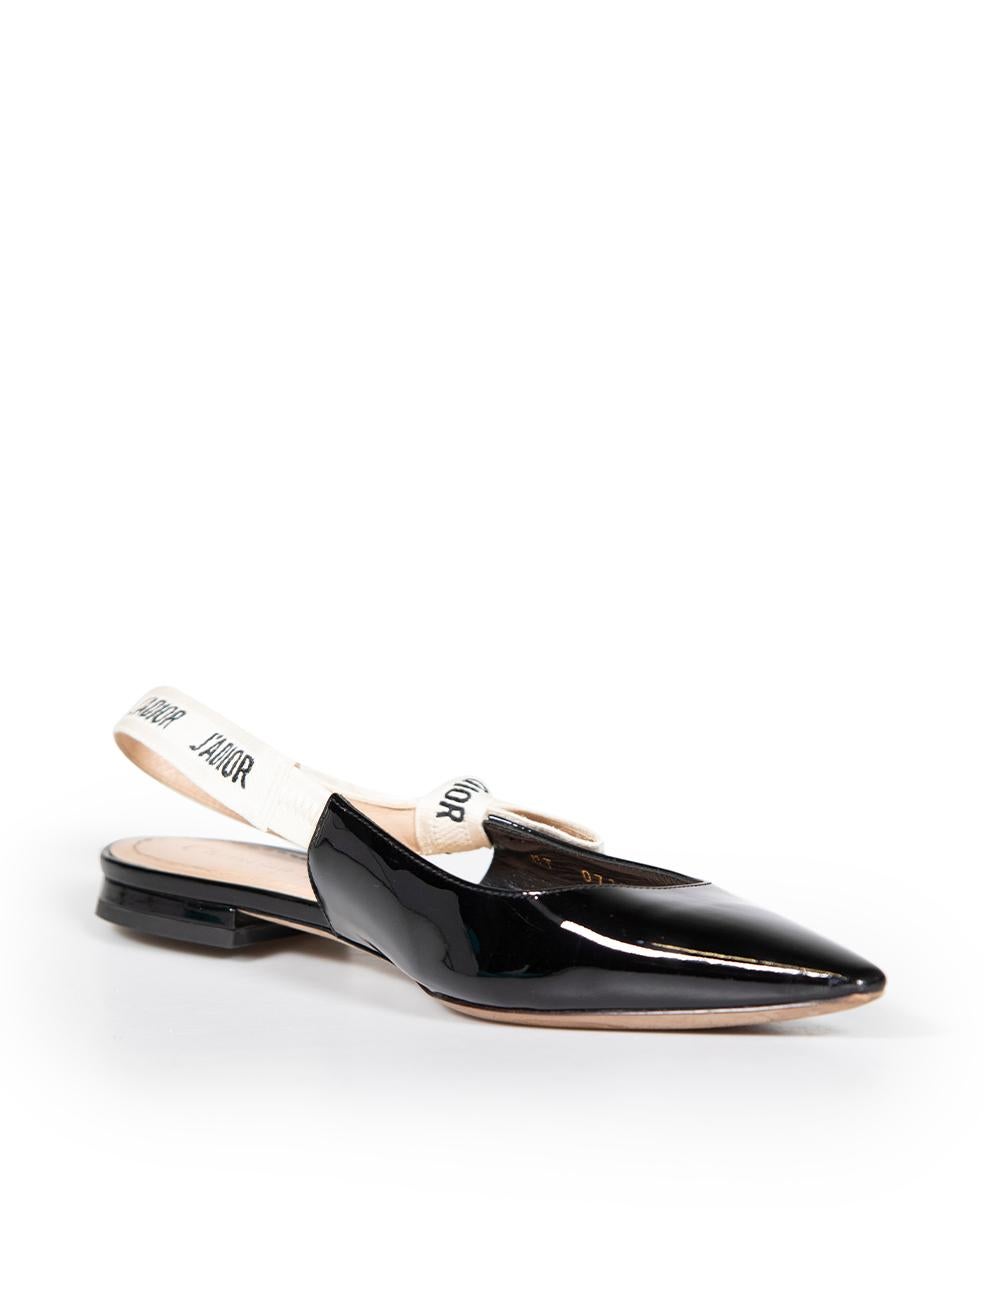 CONDITION is Very good. Minimal wear to shoes is evident. Minimal wear to both shoe toes with small abrasions to the leather on this used Dior designer resale item.
 
 
 
 Details
 
 
 Model: J‚ÄôAdior
 
 Black
 
 Patent leather
 
 Flats
 
 Point